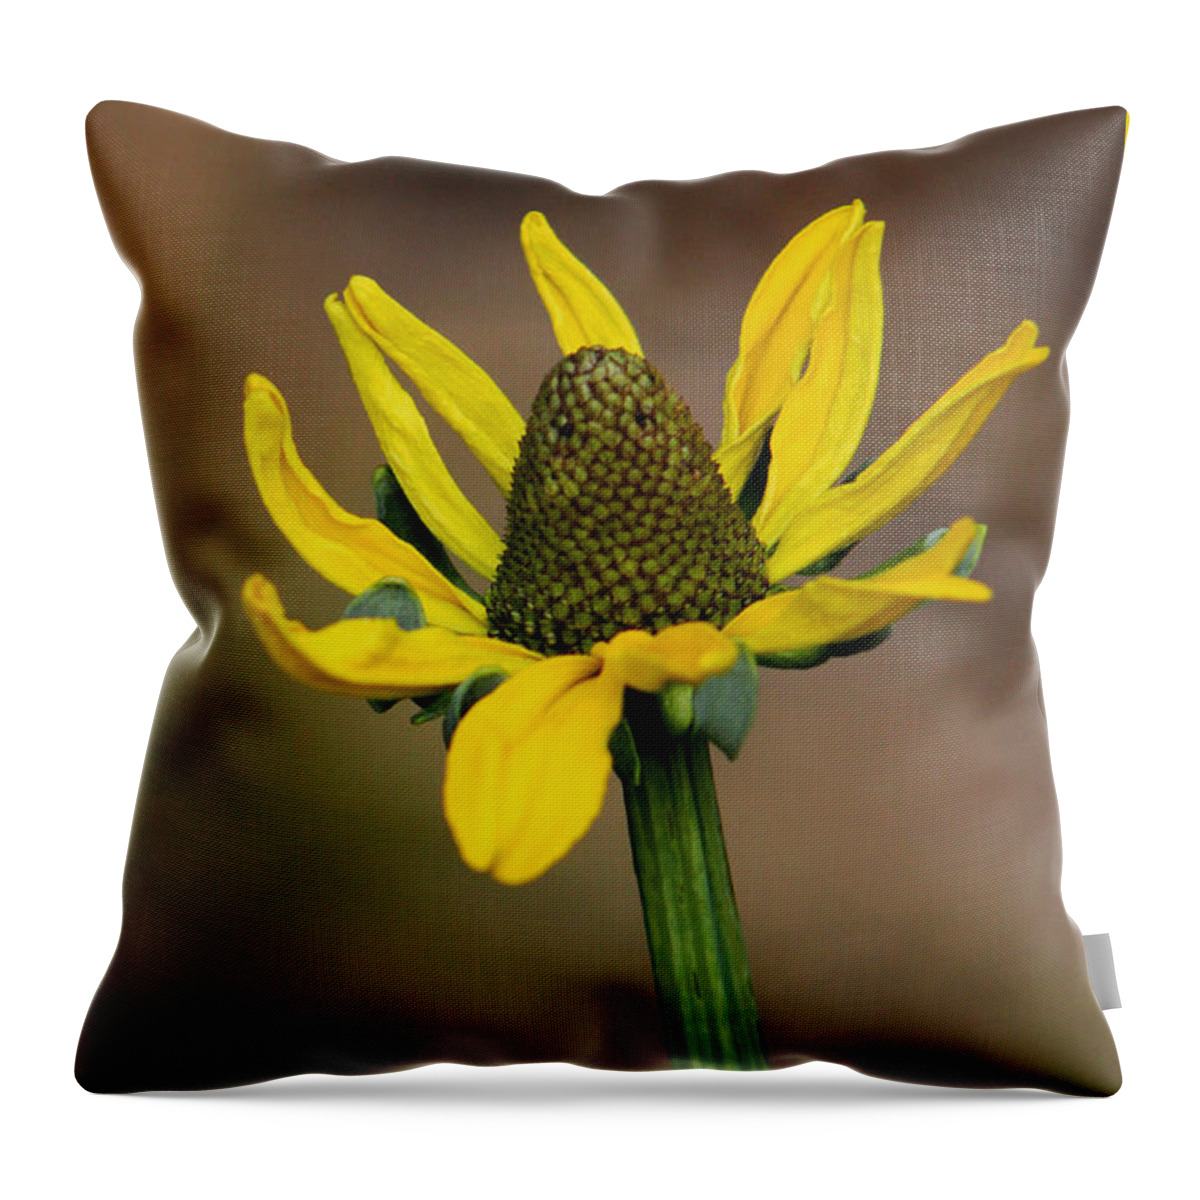 Flower Throw Pillow featuring the photograph Bright and Shining by Deborah Crew-Johnson